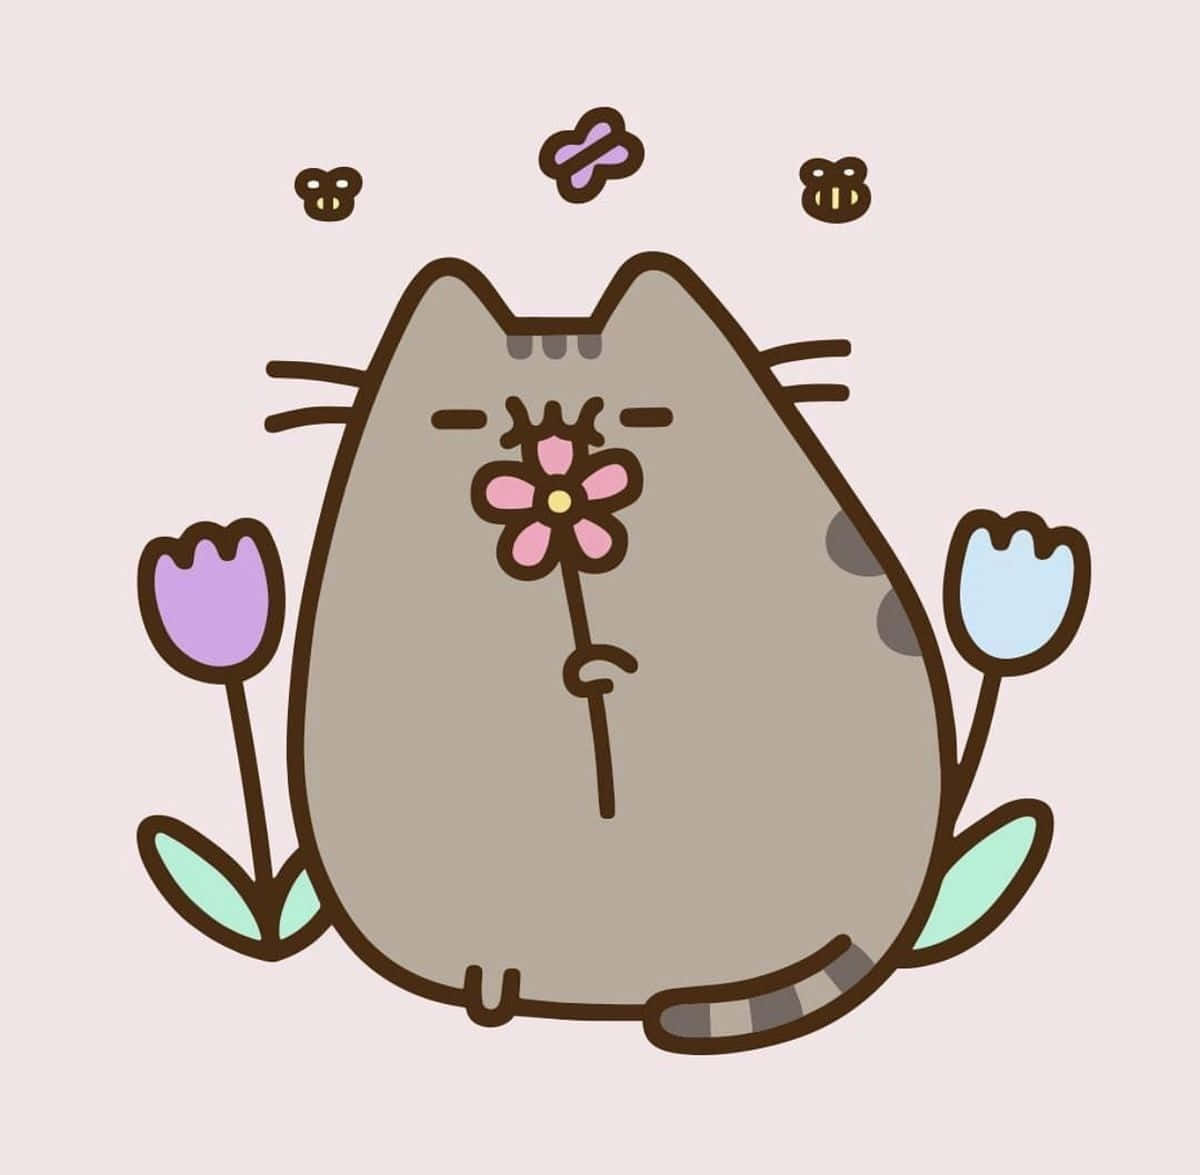 Pusheen in a peaceful garden, taking her time to relax